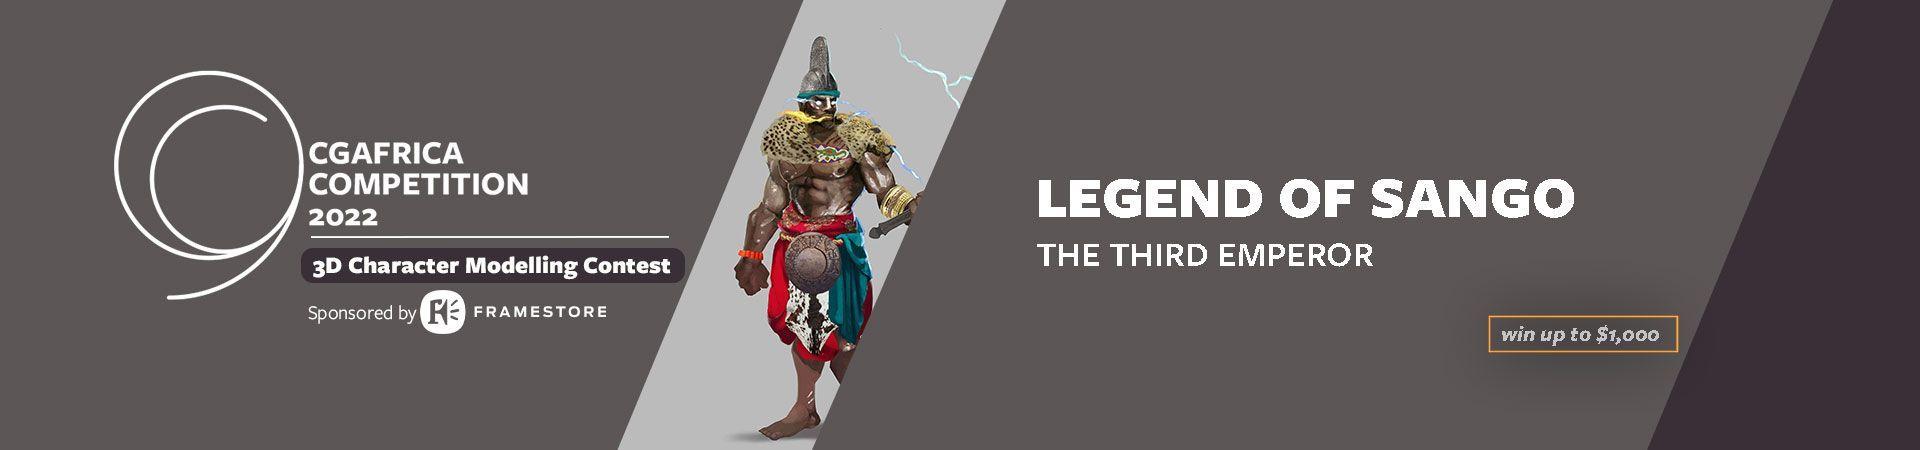 CGAfrica Competition: Legend Of Sango: The Third Emperor (3D Character Design) Sponsored by Framestore Winners Announced | CGAfrica